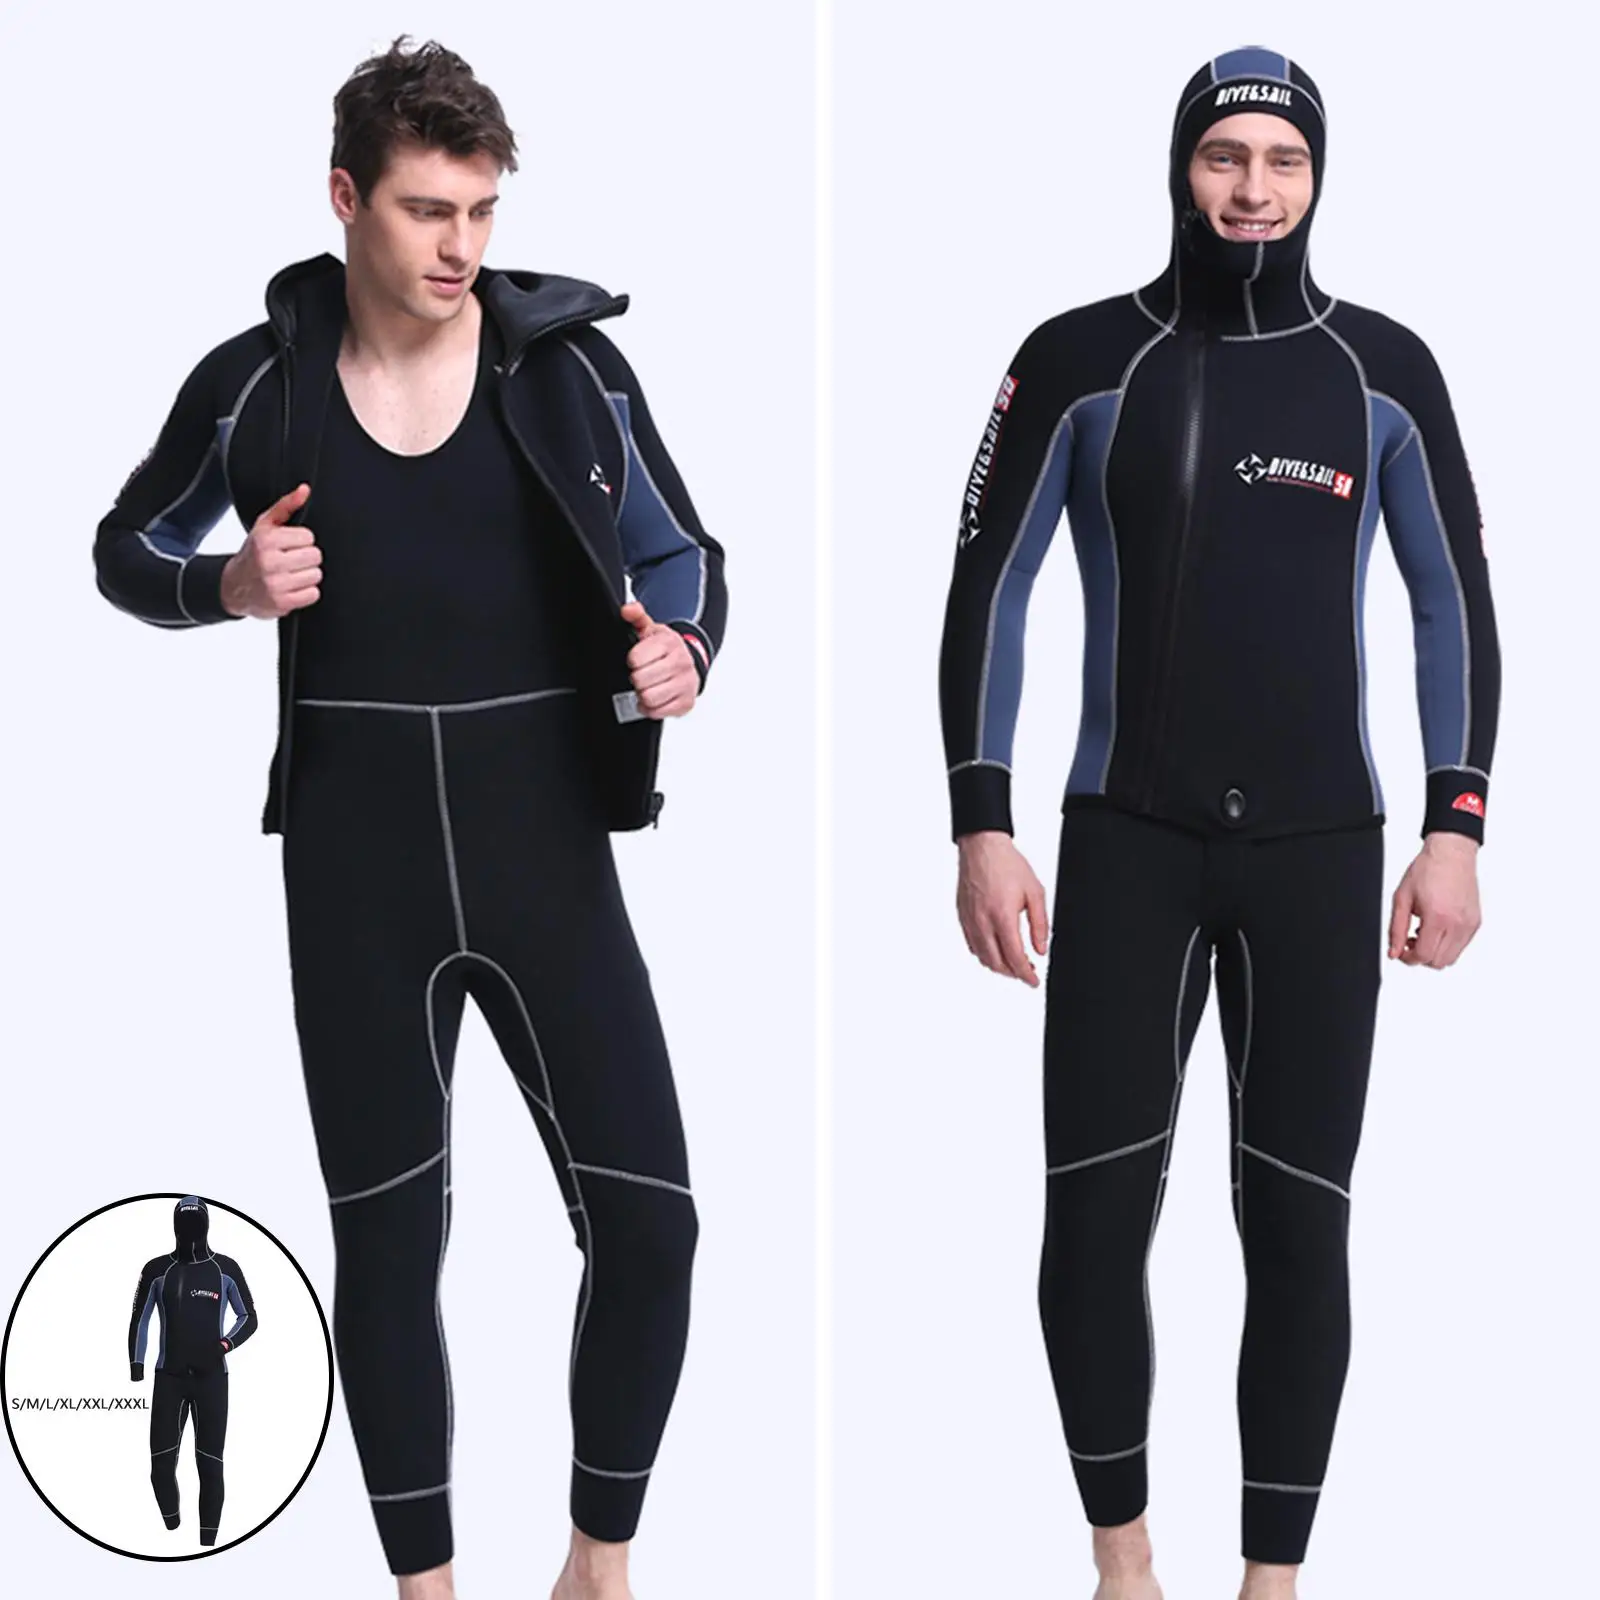 Men Wetsuit, 5mm Neoprene Two Piece Swimsuit, Long Sleeves, Warm And UV Protection, Suitable for Diving Swimming Surfing